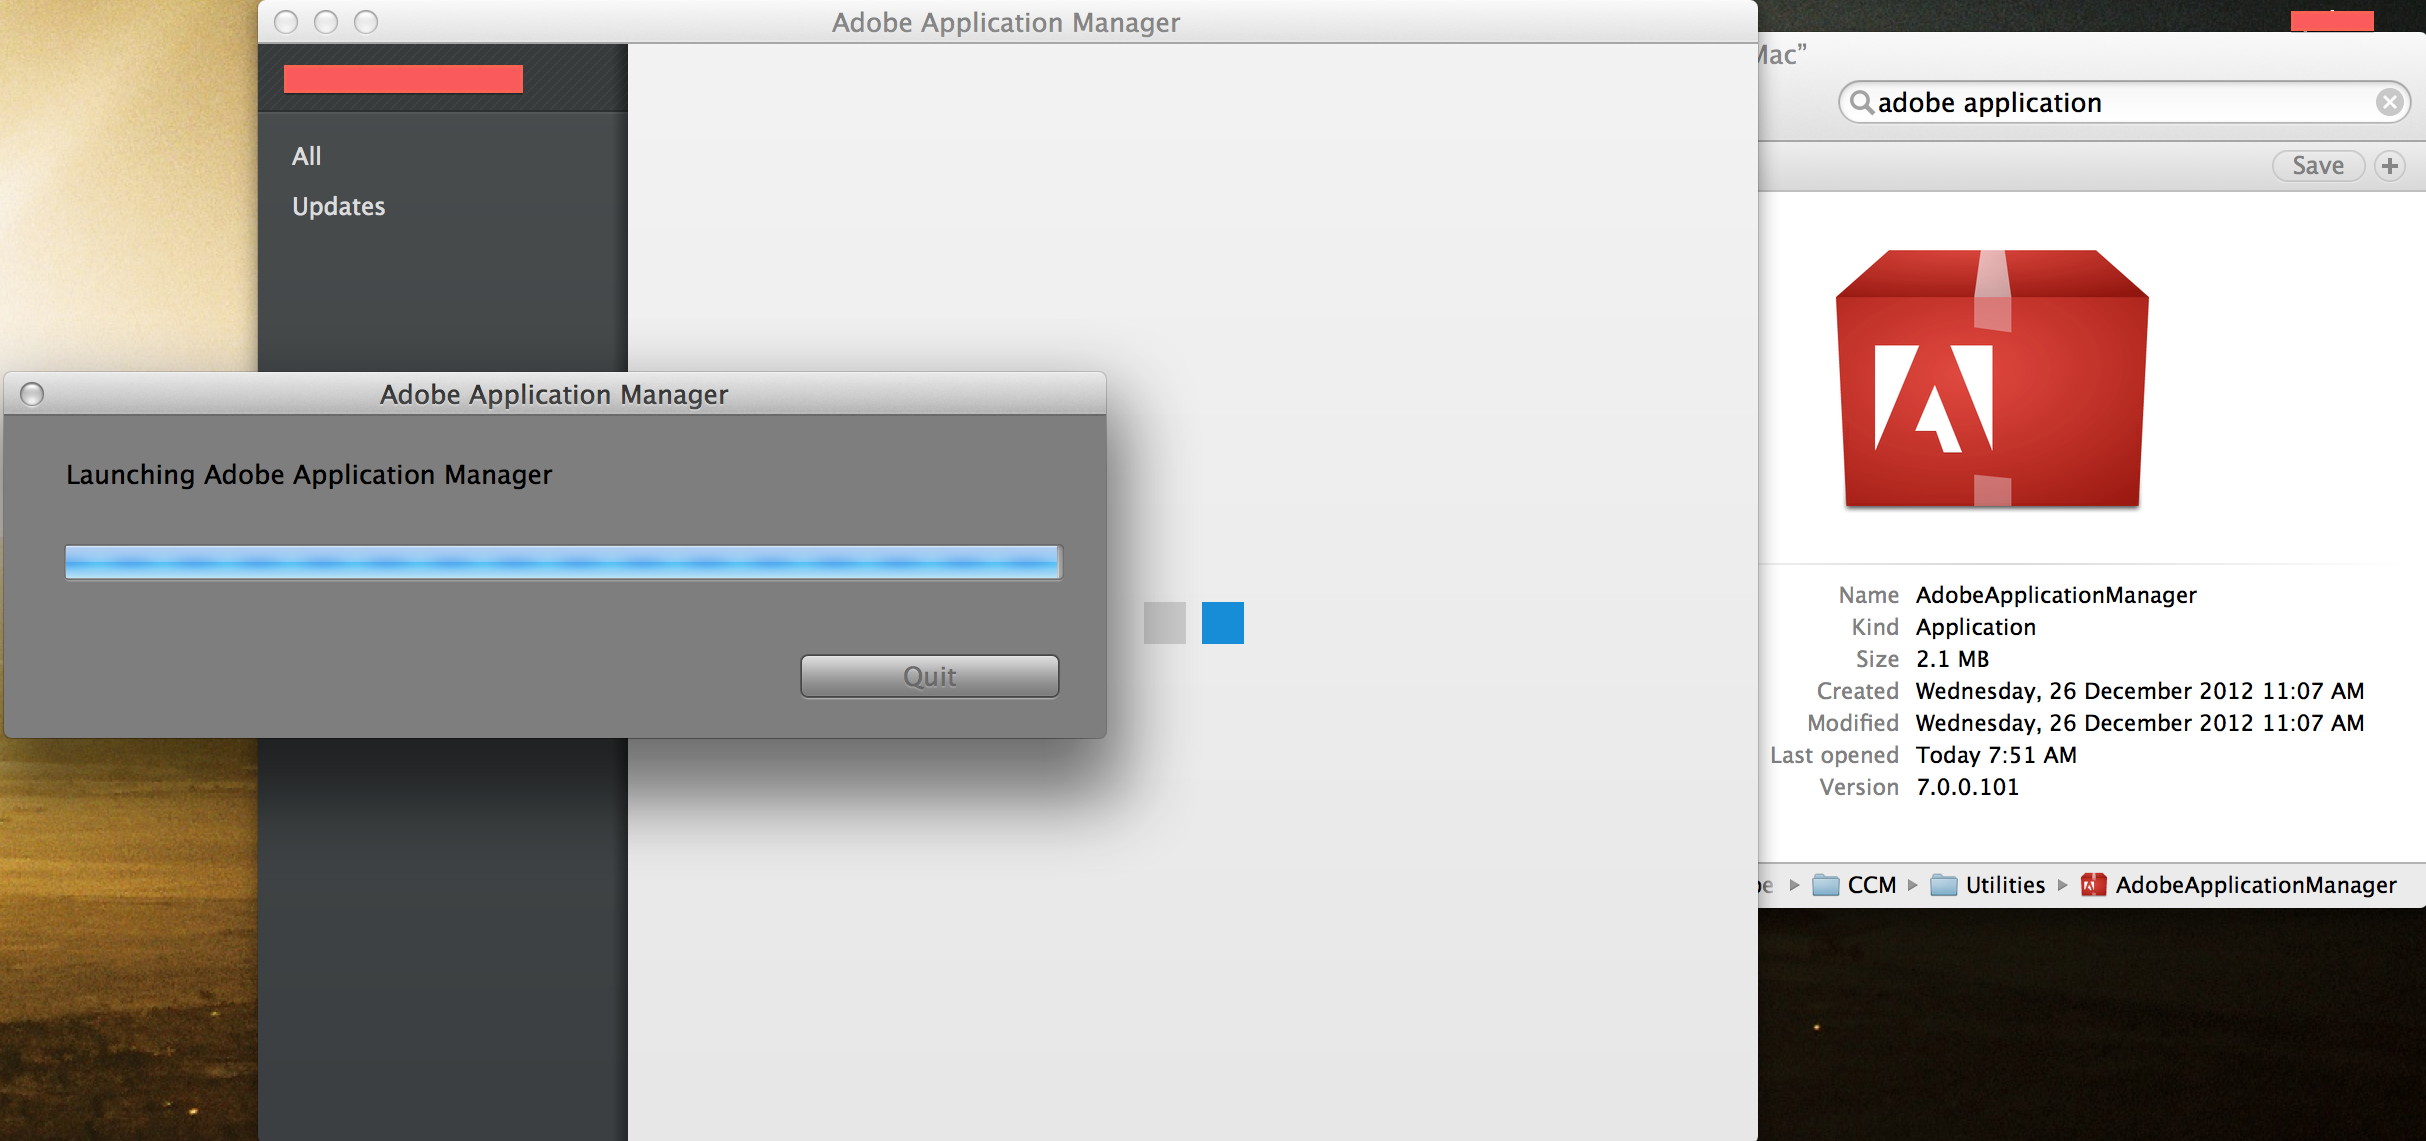 adobe application manager utilites is not optimized for your mac and needs to be updated